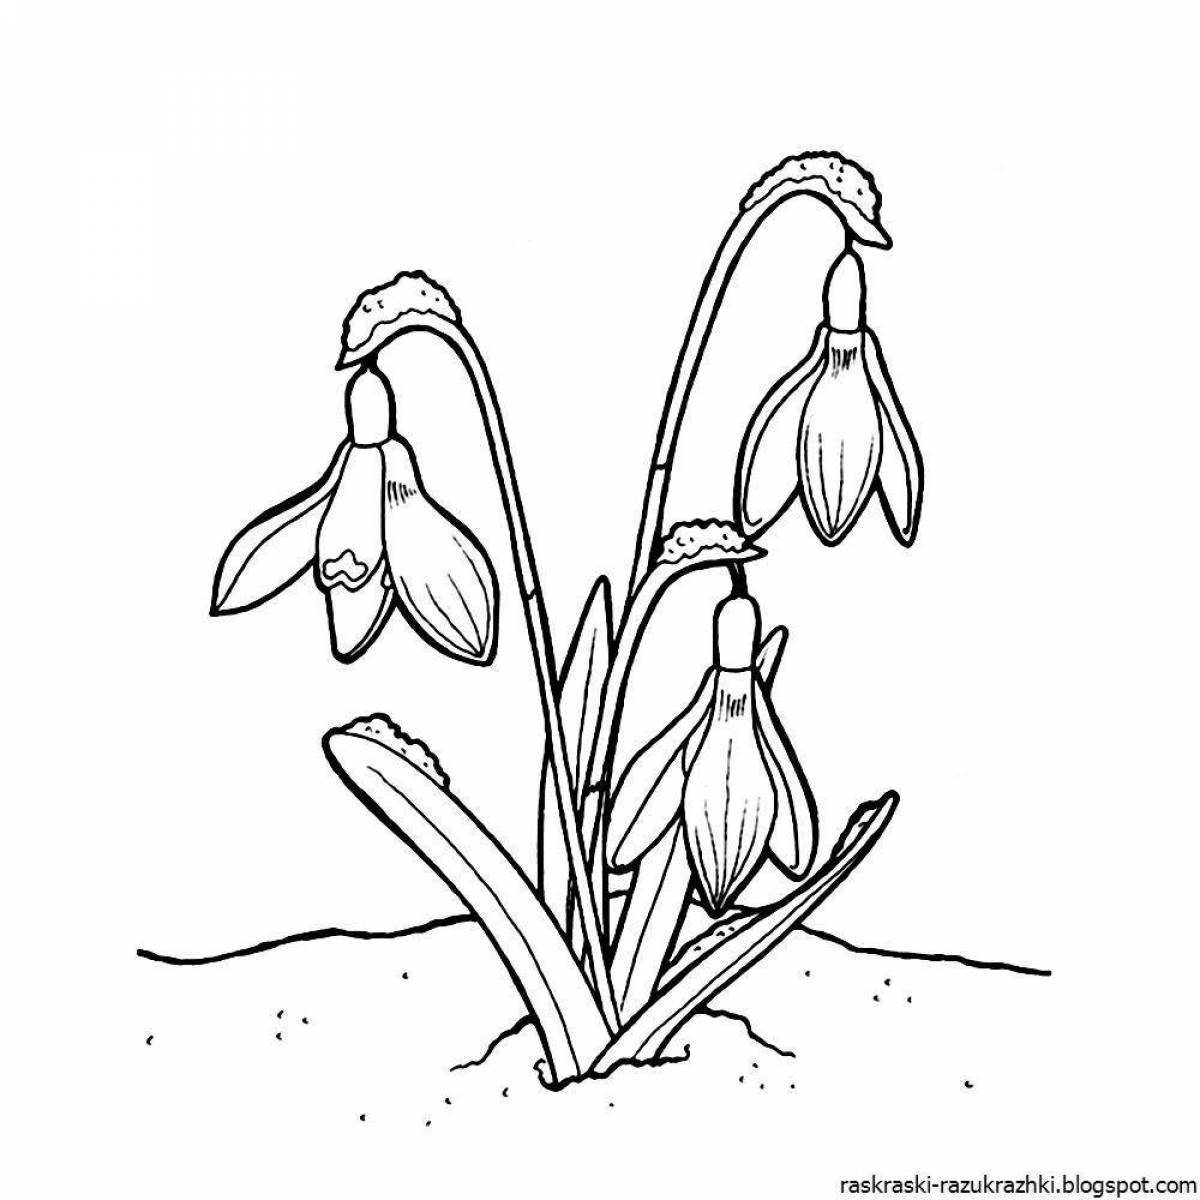 A fun snowdrop coloring book for kids